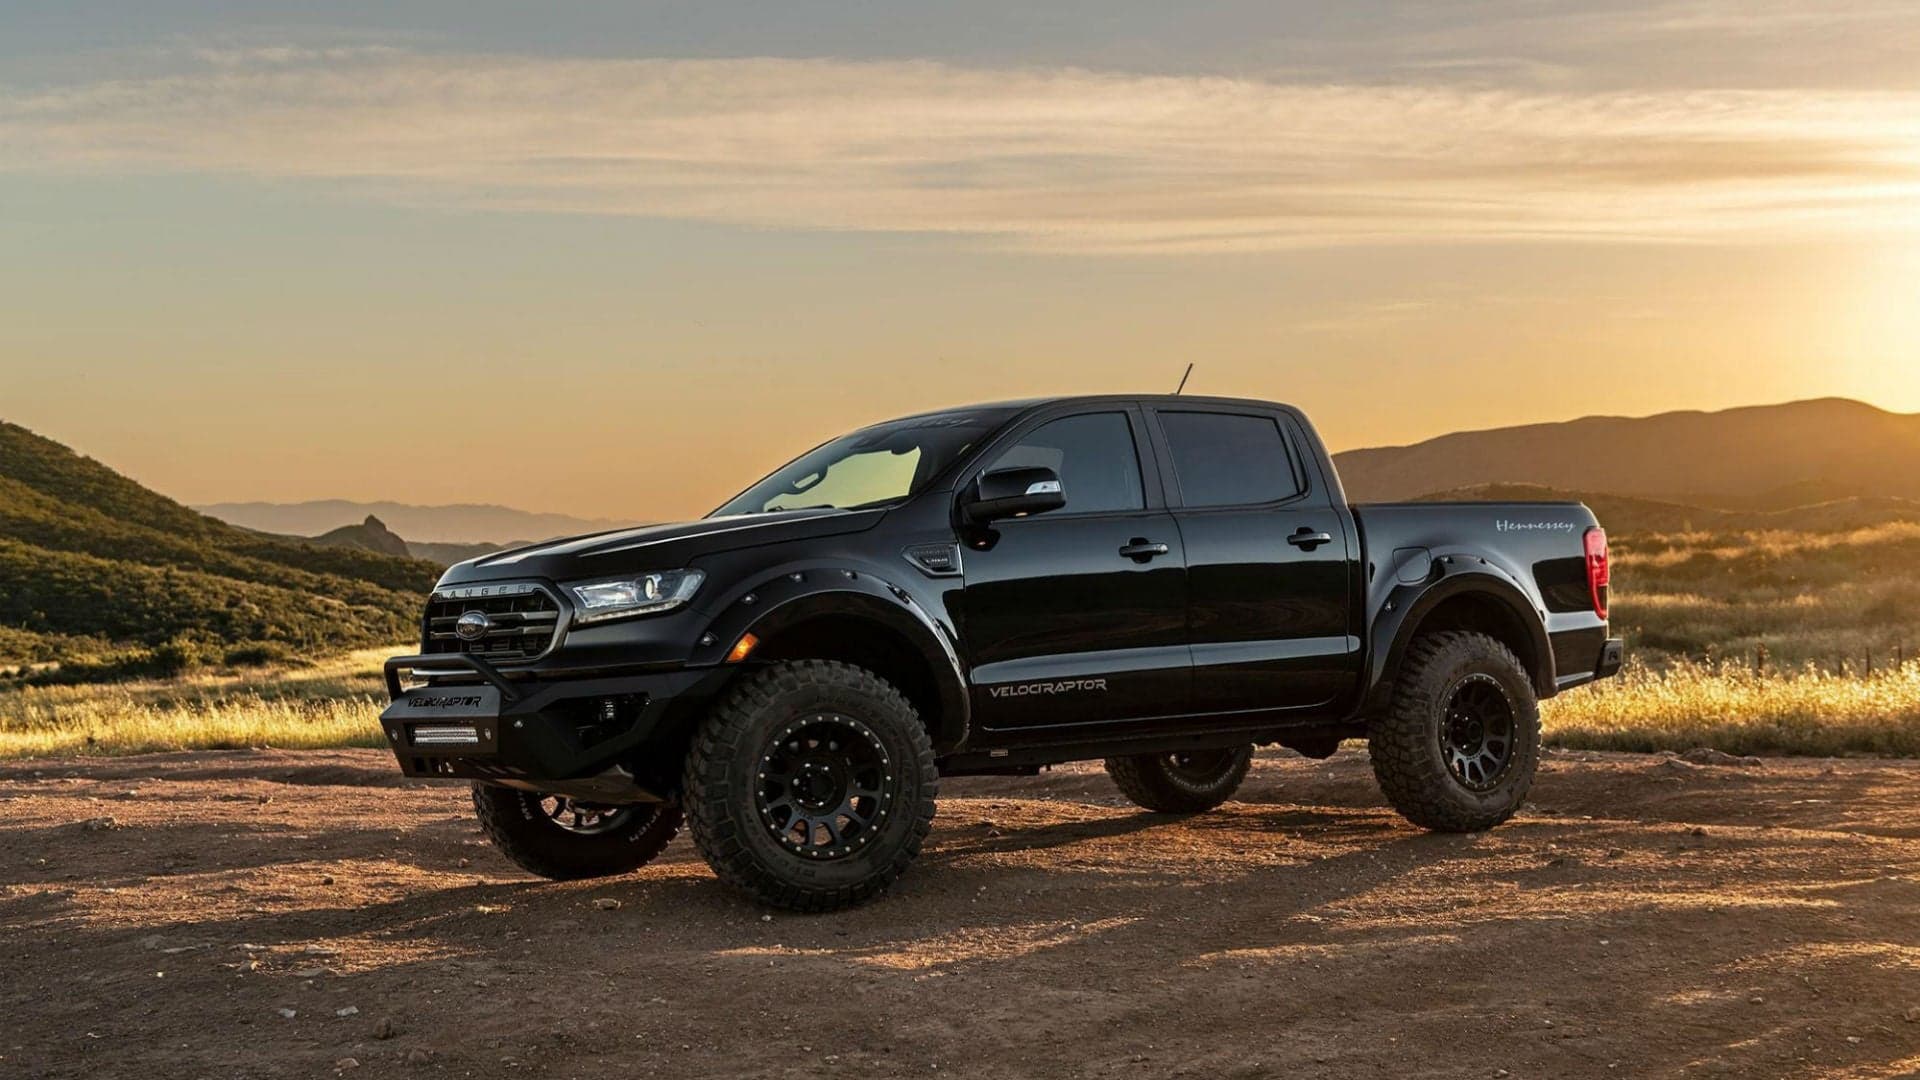 The 2019 Hennessey VelociRaptor Ford Ranger Is Quicker Than an F-150 Raptor